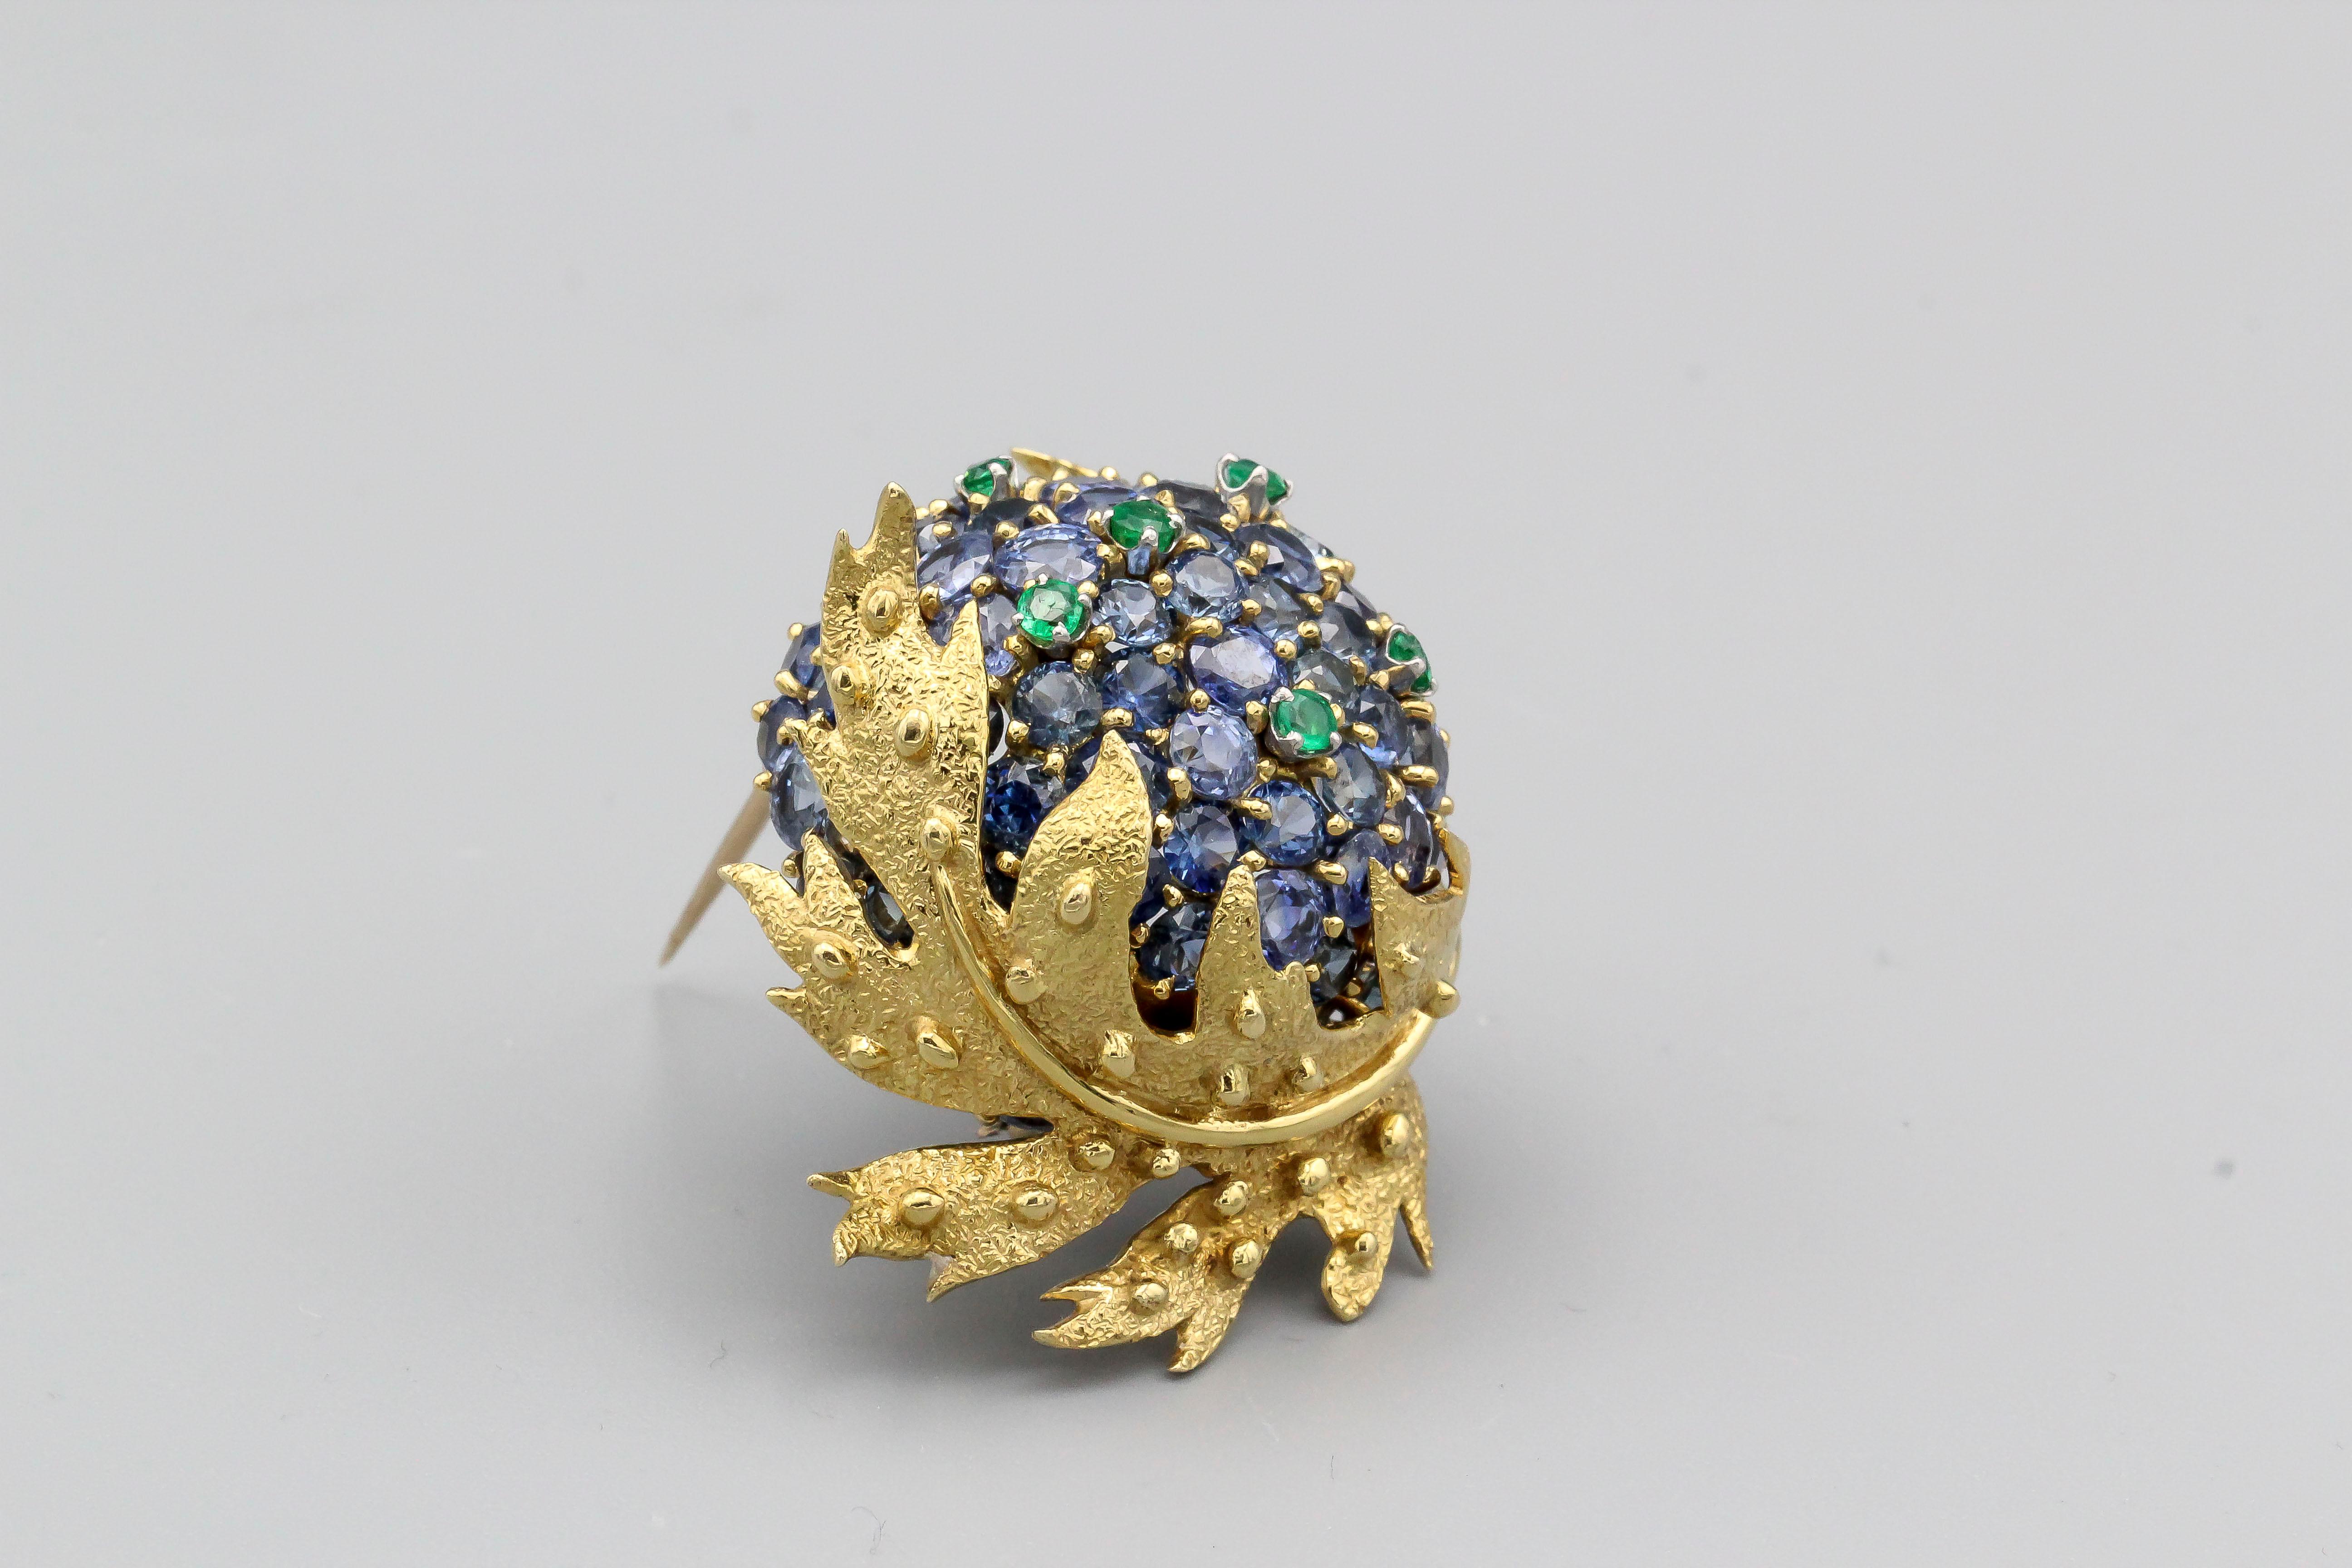 Very fine brooch by Tiffany & Co. Schlumberger, circa 1970s.  Made in 18k yellow gold with sapphires and emeralds, in the likeness of a chestnut.  A charming brooch full of life and whimsy, can be worn with versatility both day and